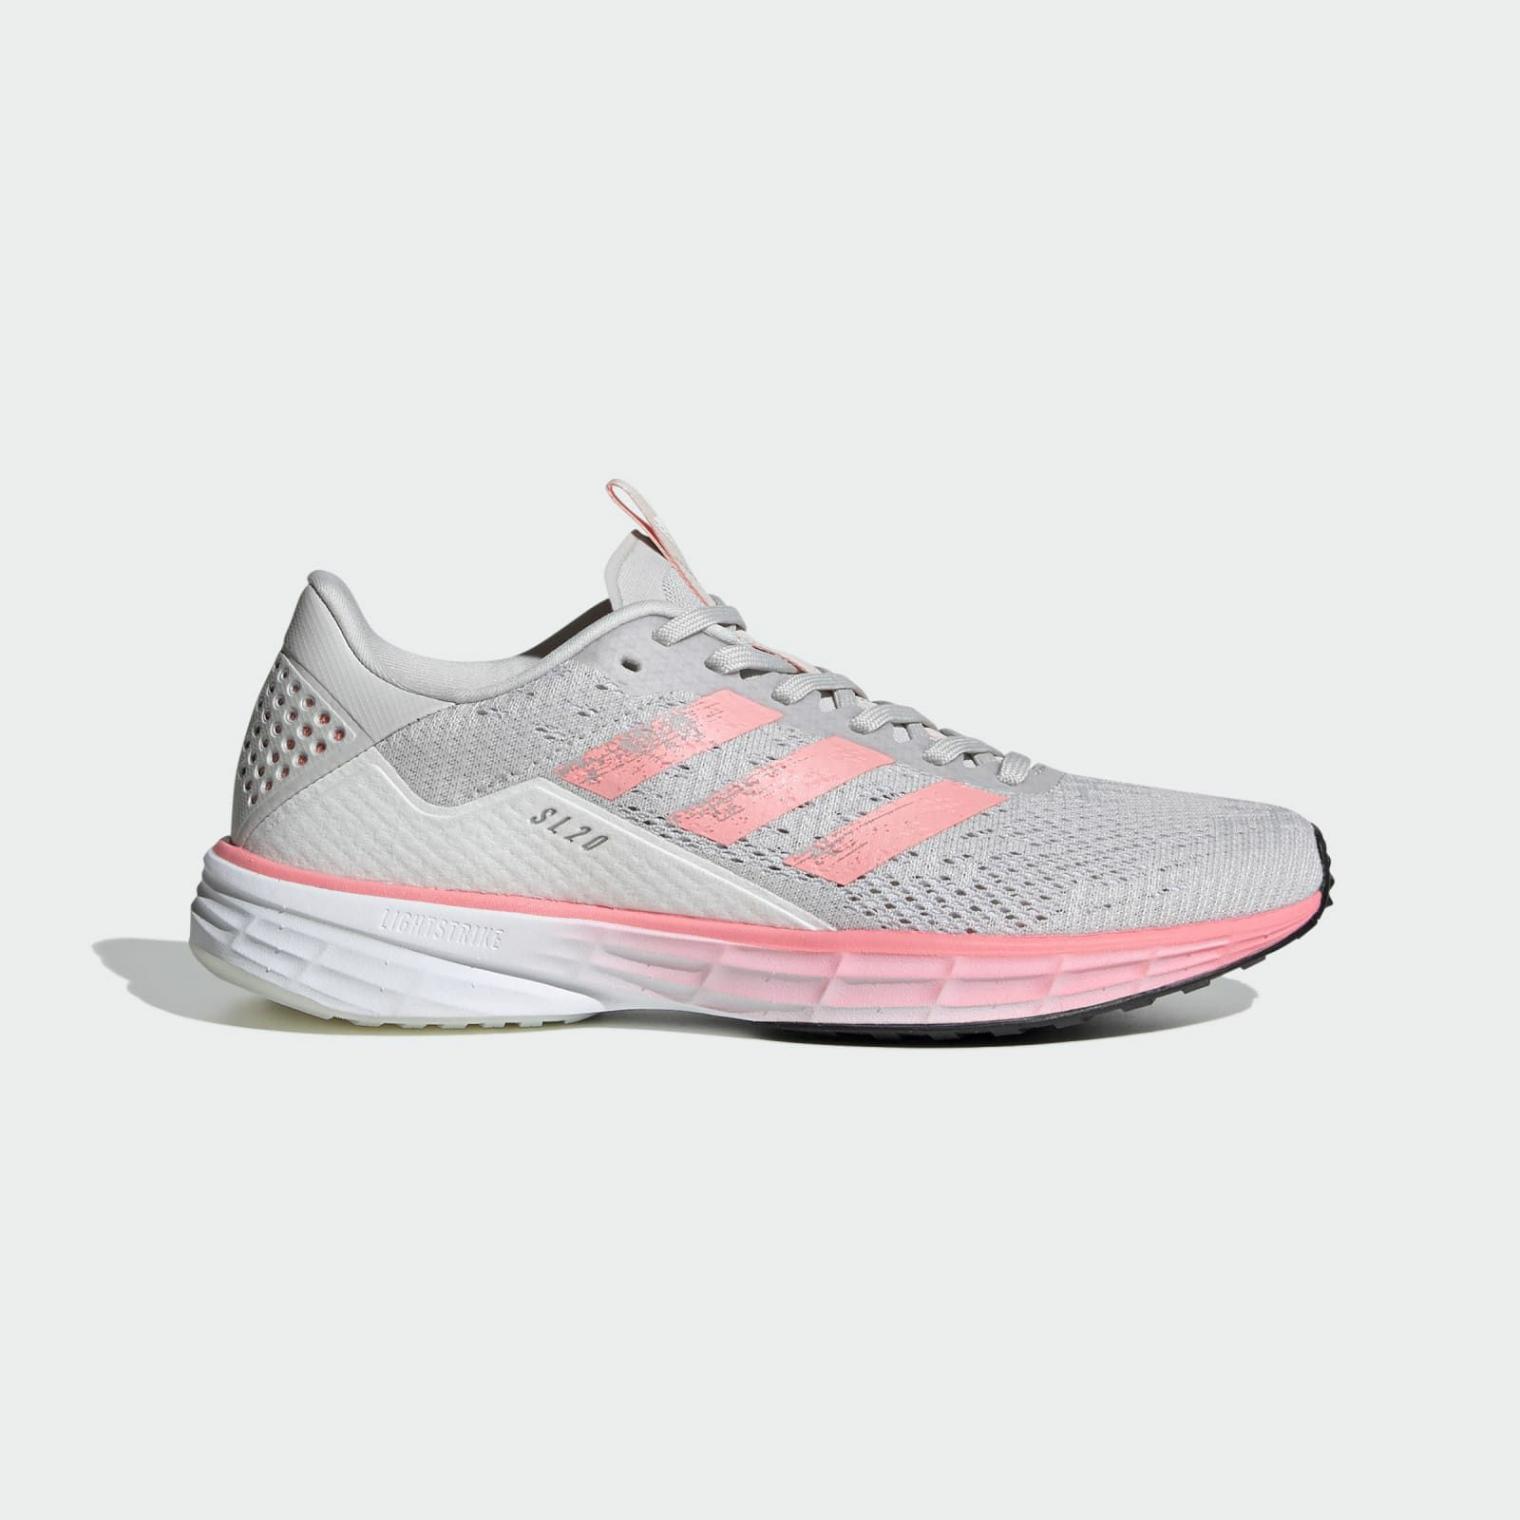 tapa gráfico Importancia Zapatilla SL20 SUMMER.RDY Grey One/Light Flash Red/Cloud White | Running Adidas  Mujer » Starline Magicians